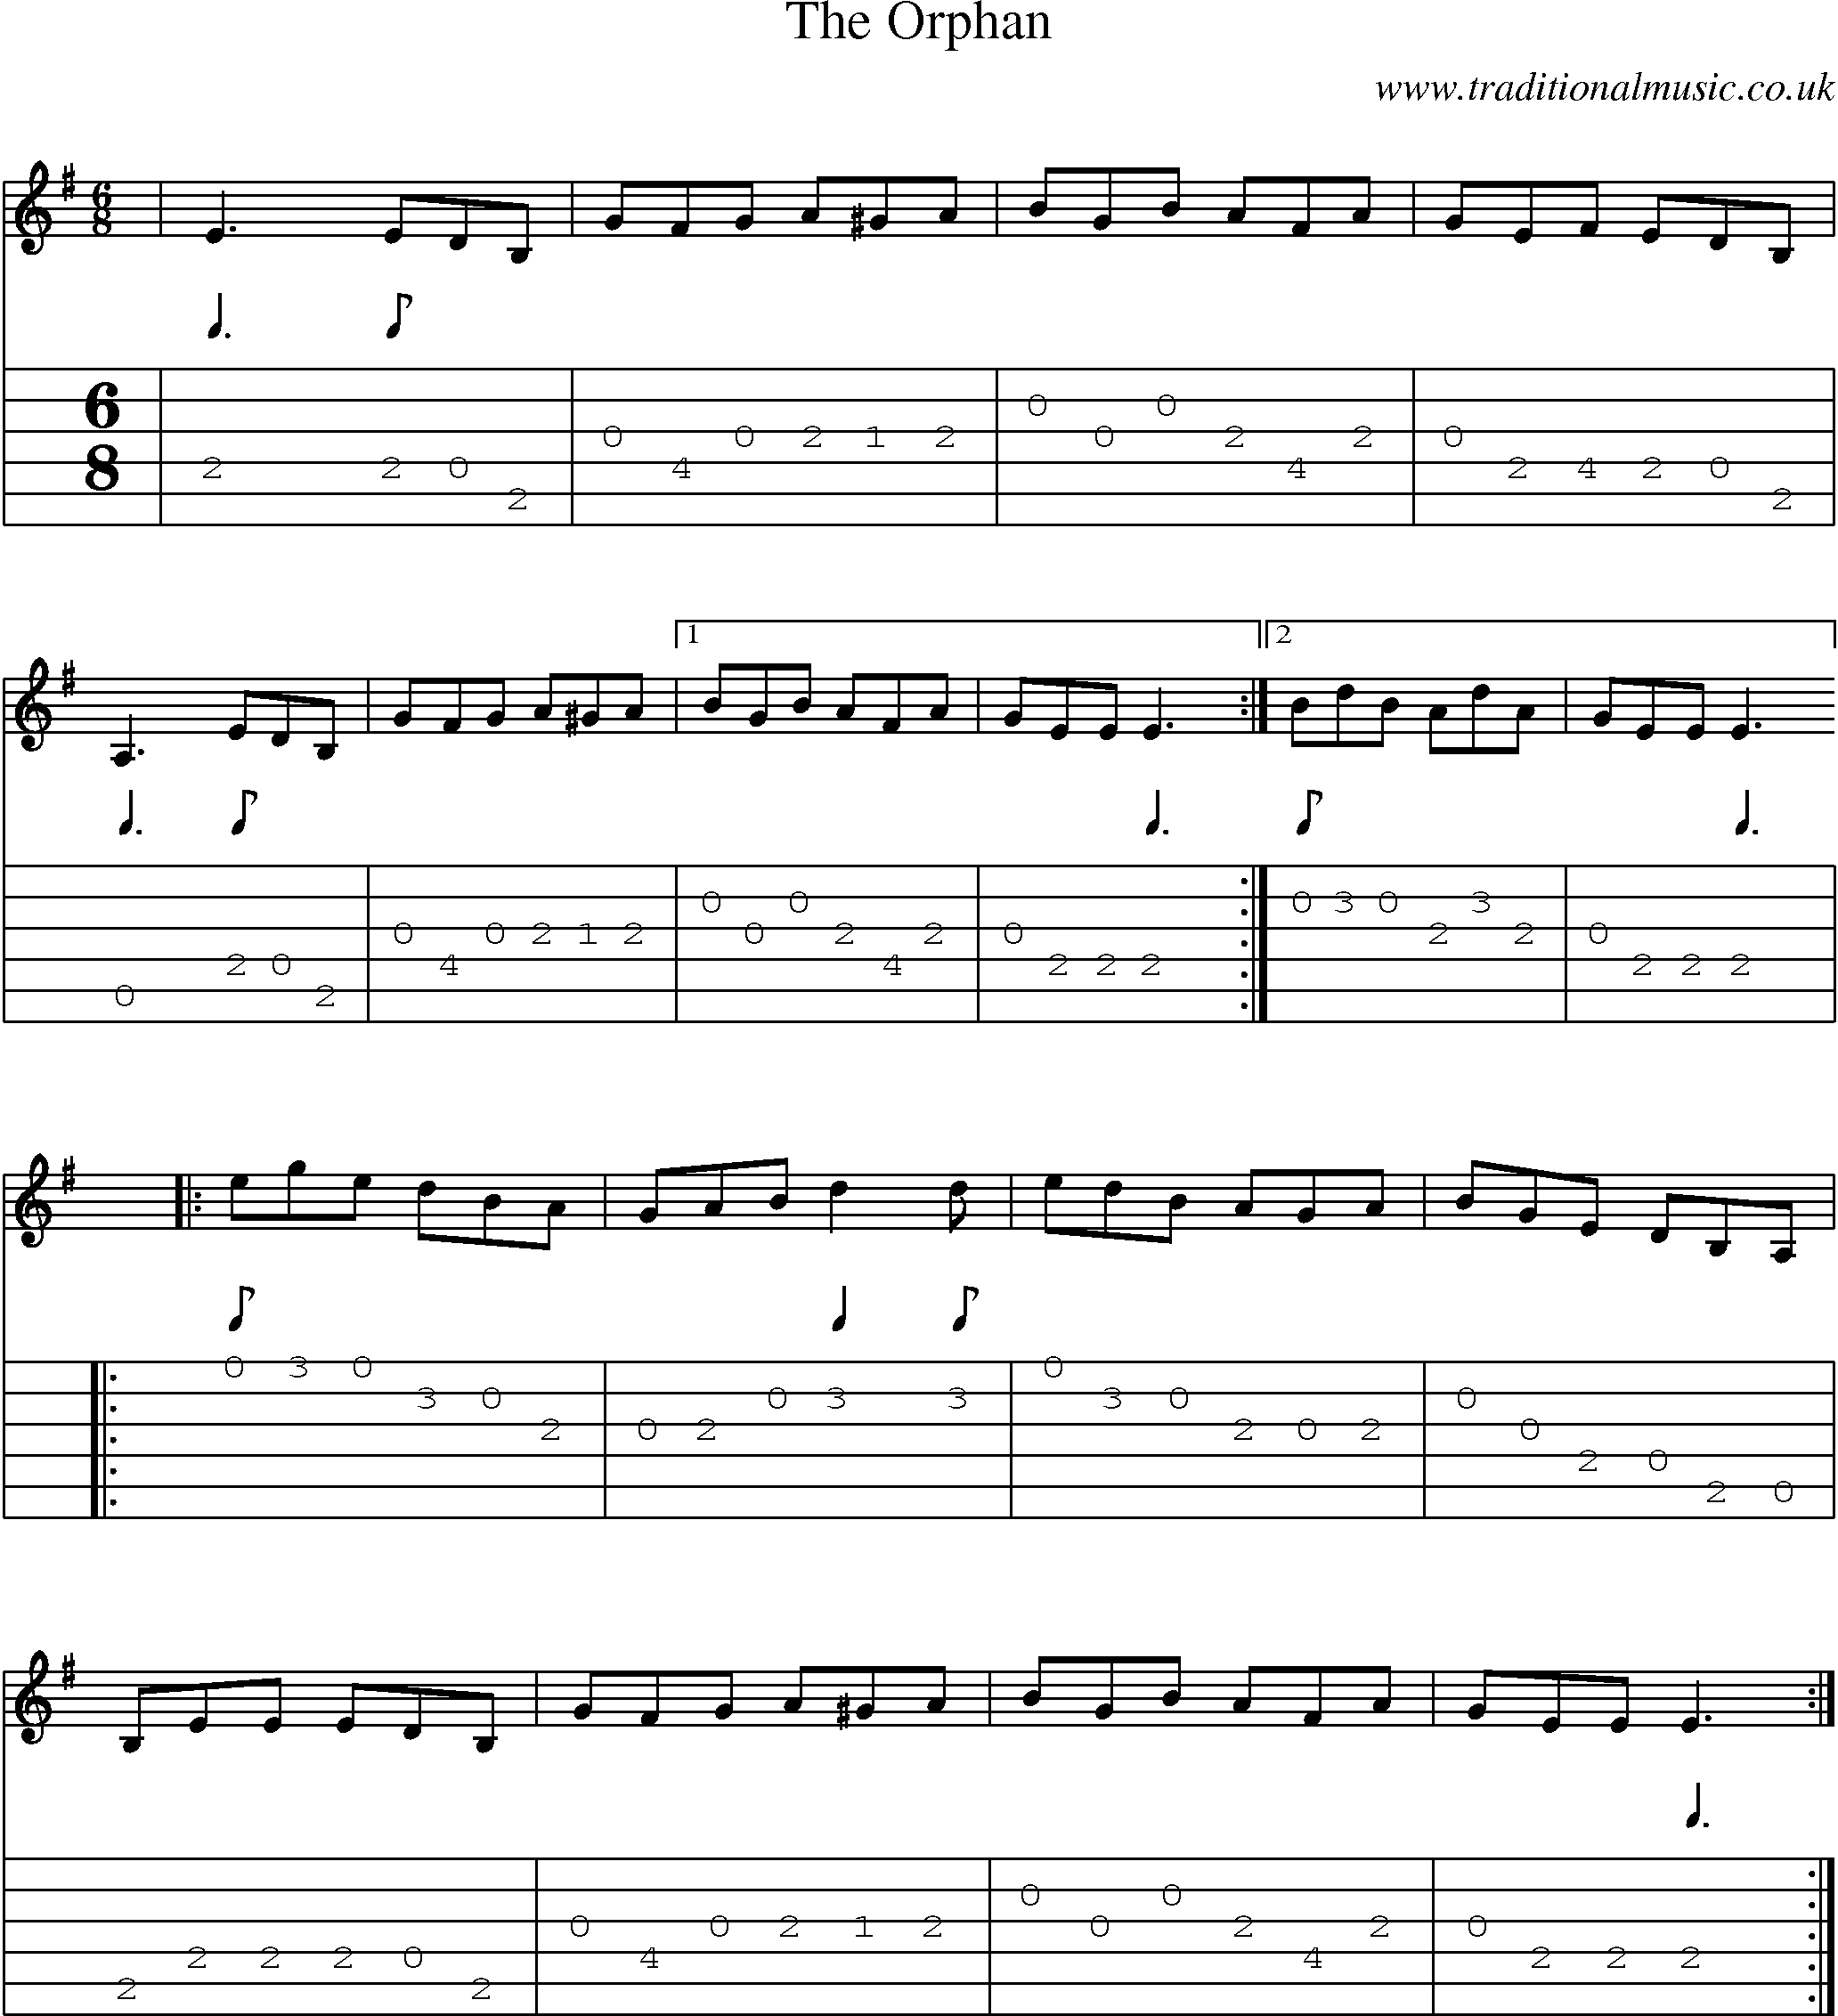 Music Score and Guitar Tabs for The Orphan